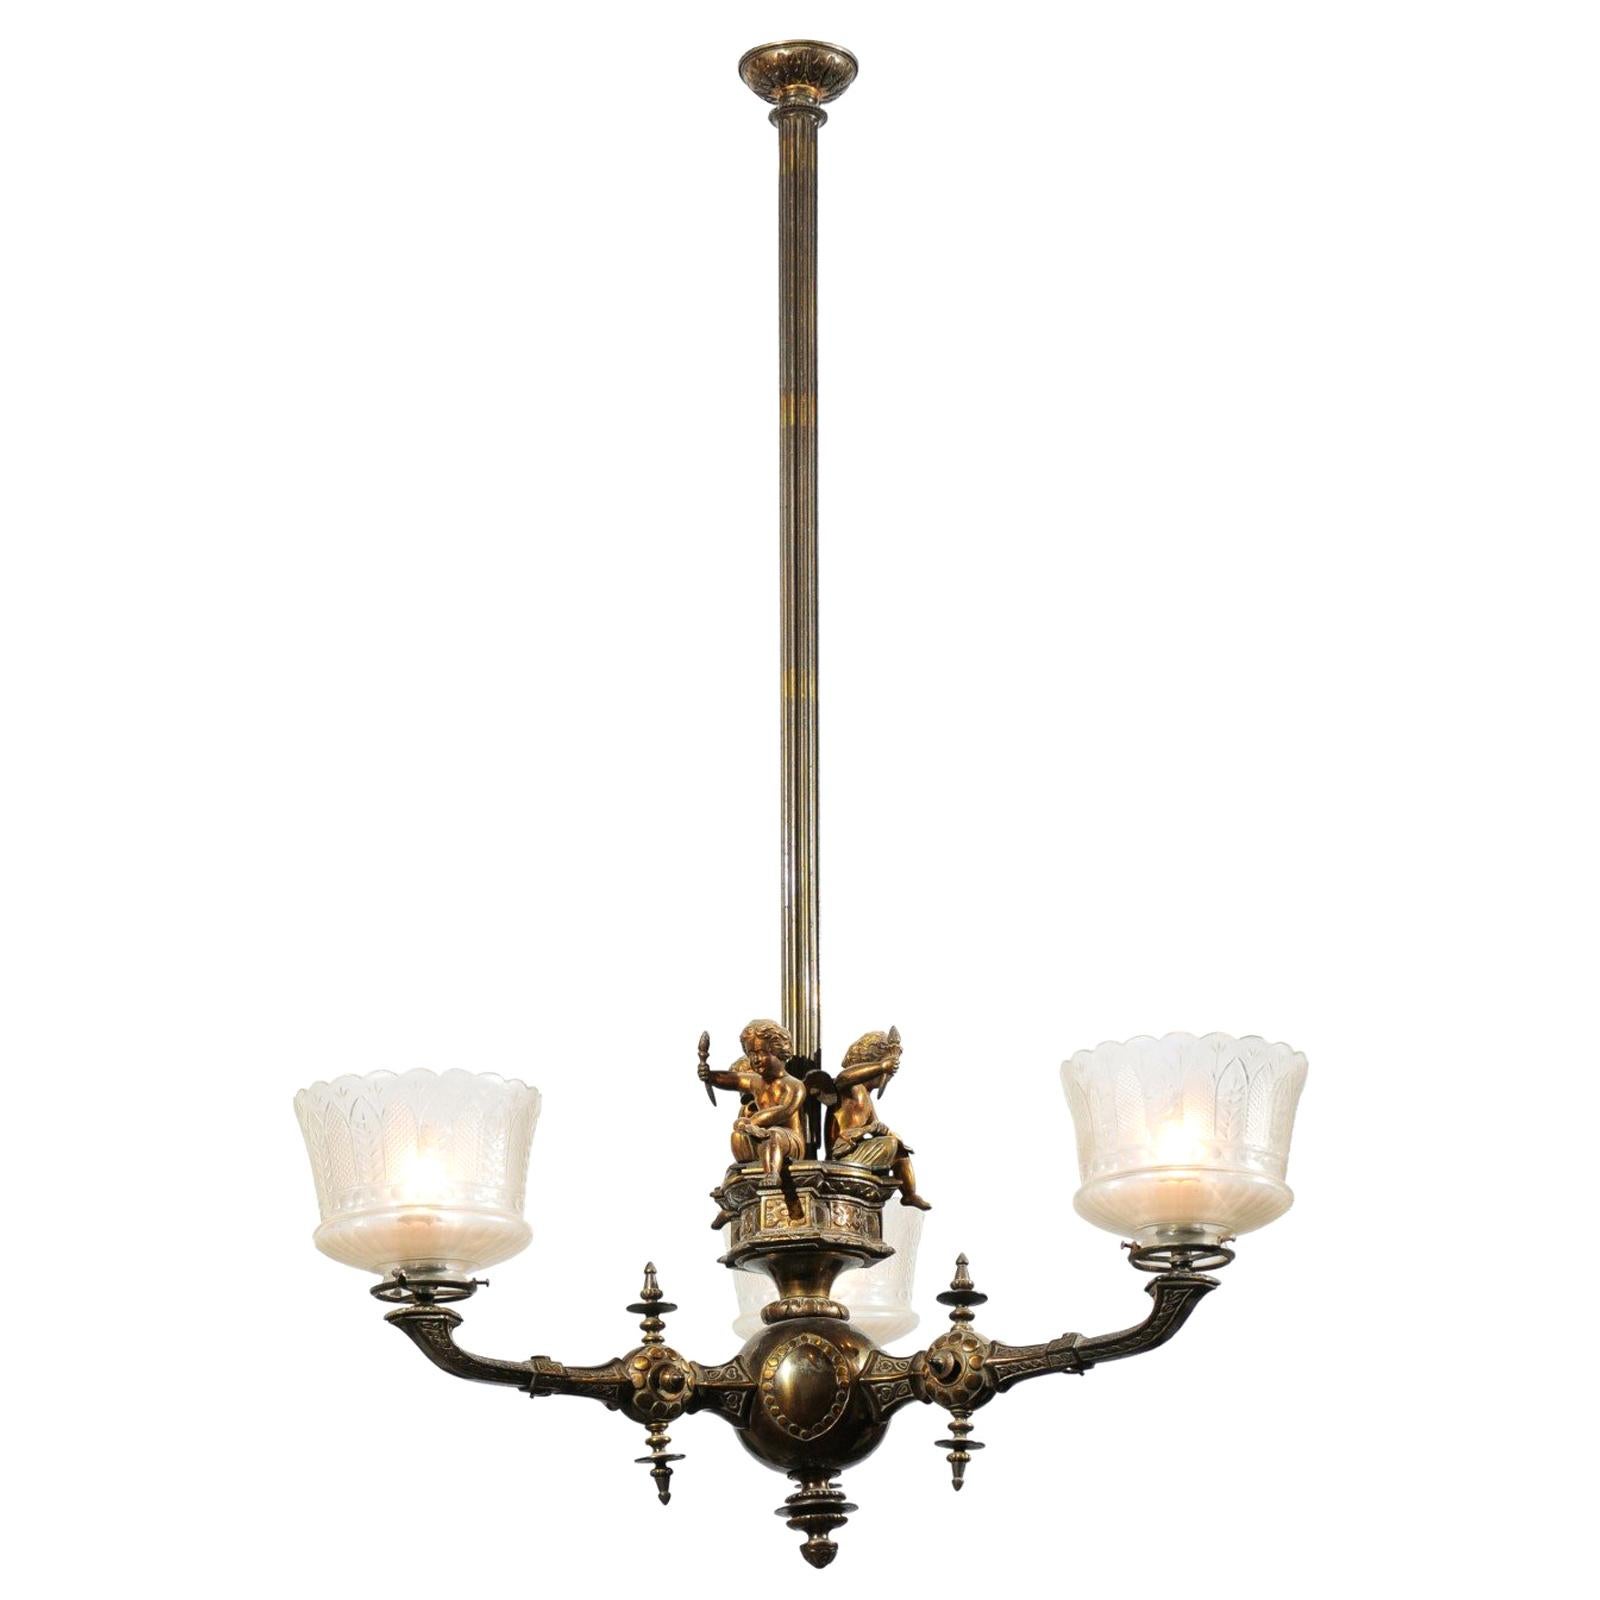 French 19th Century Three-Light Bronze and Baccarat Chandelier with Cherubs